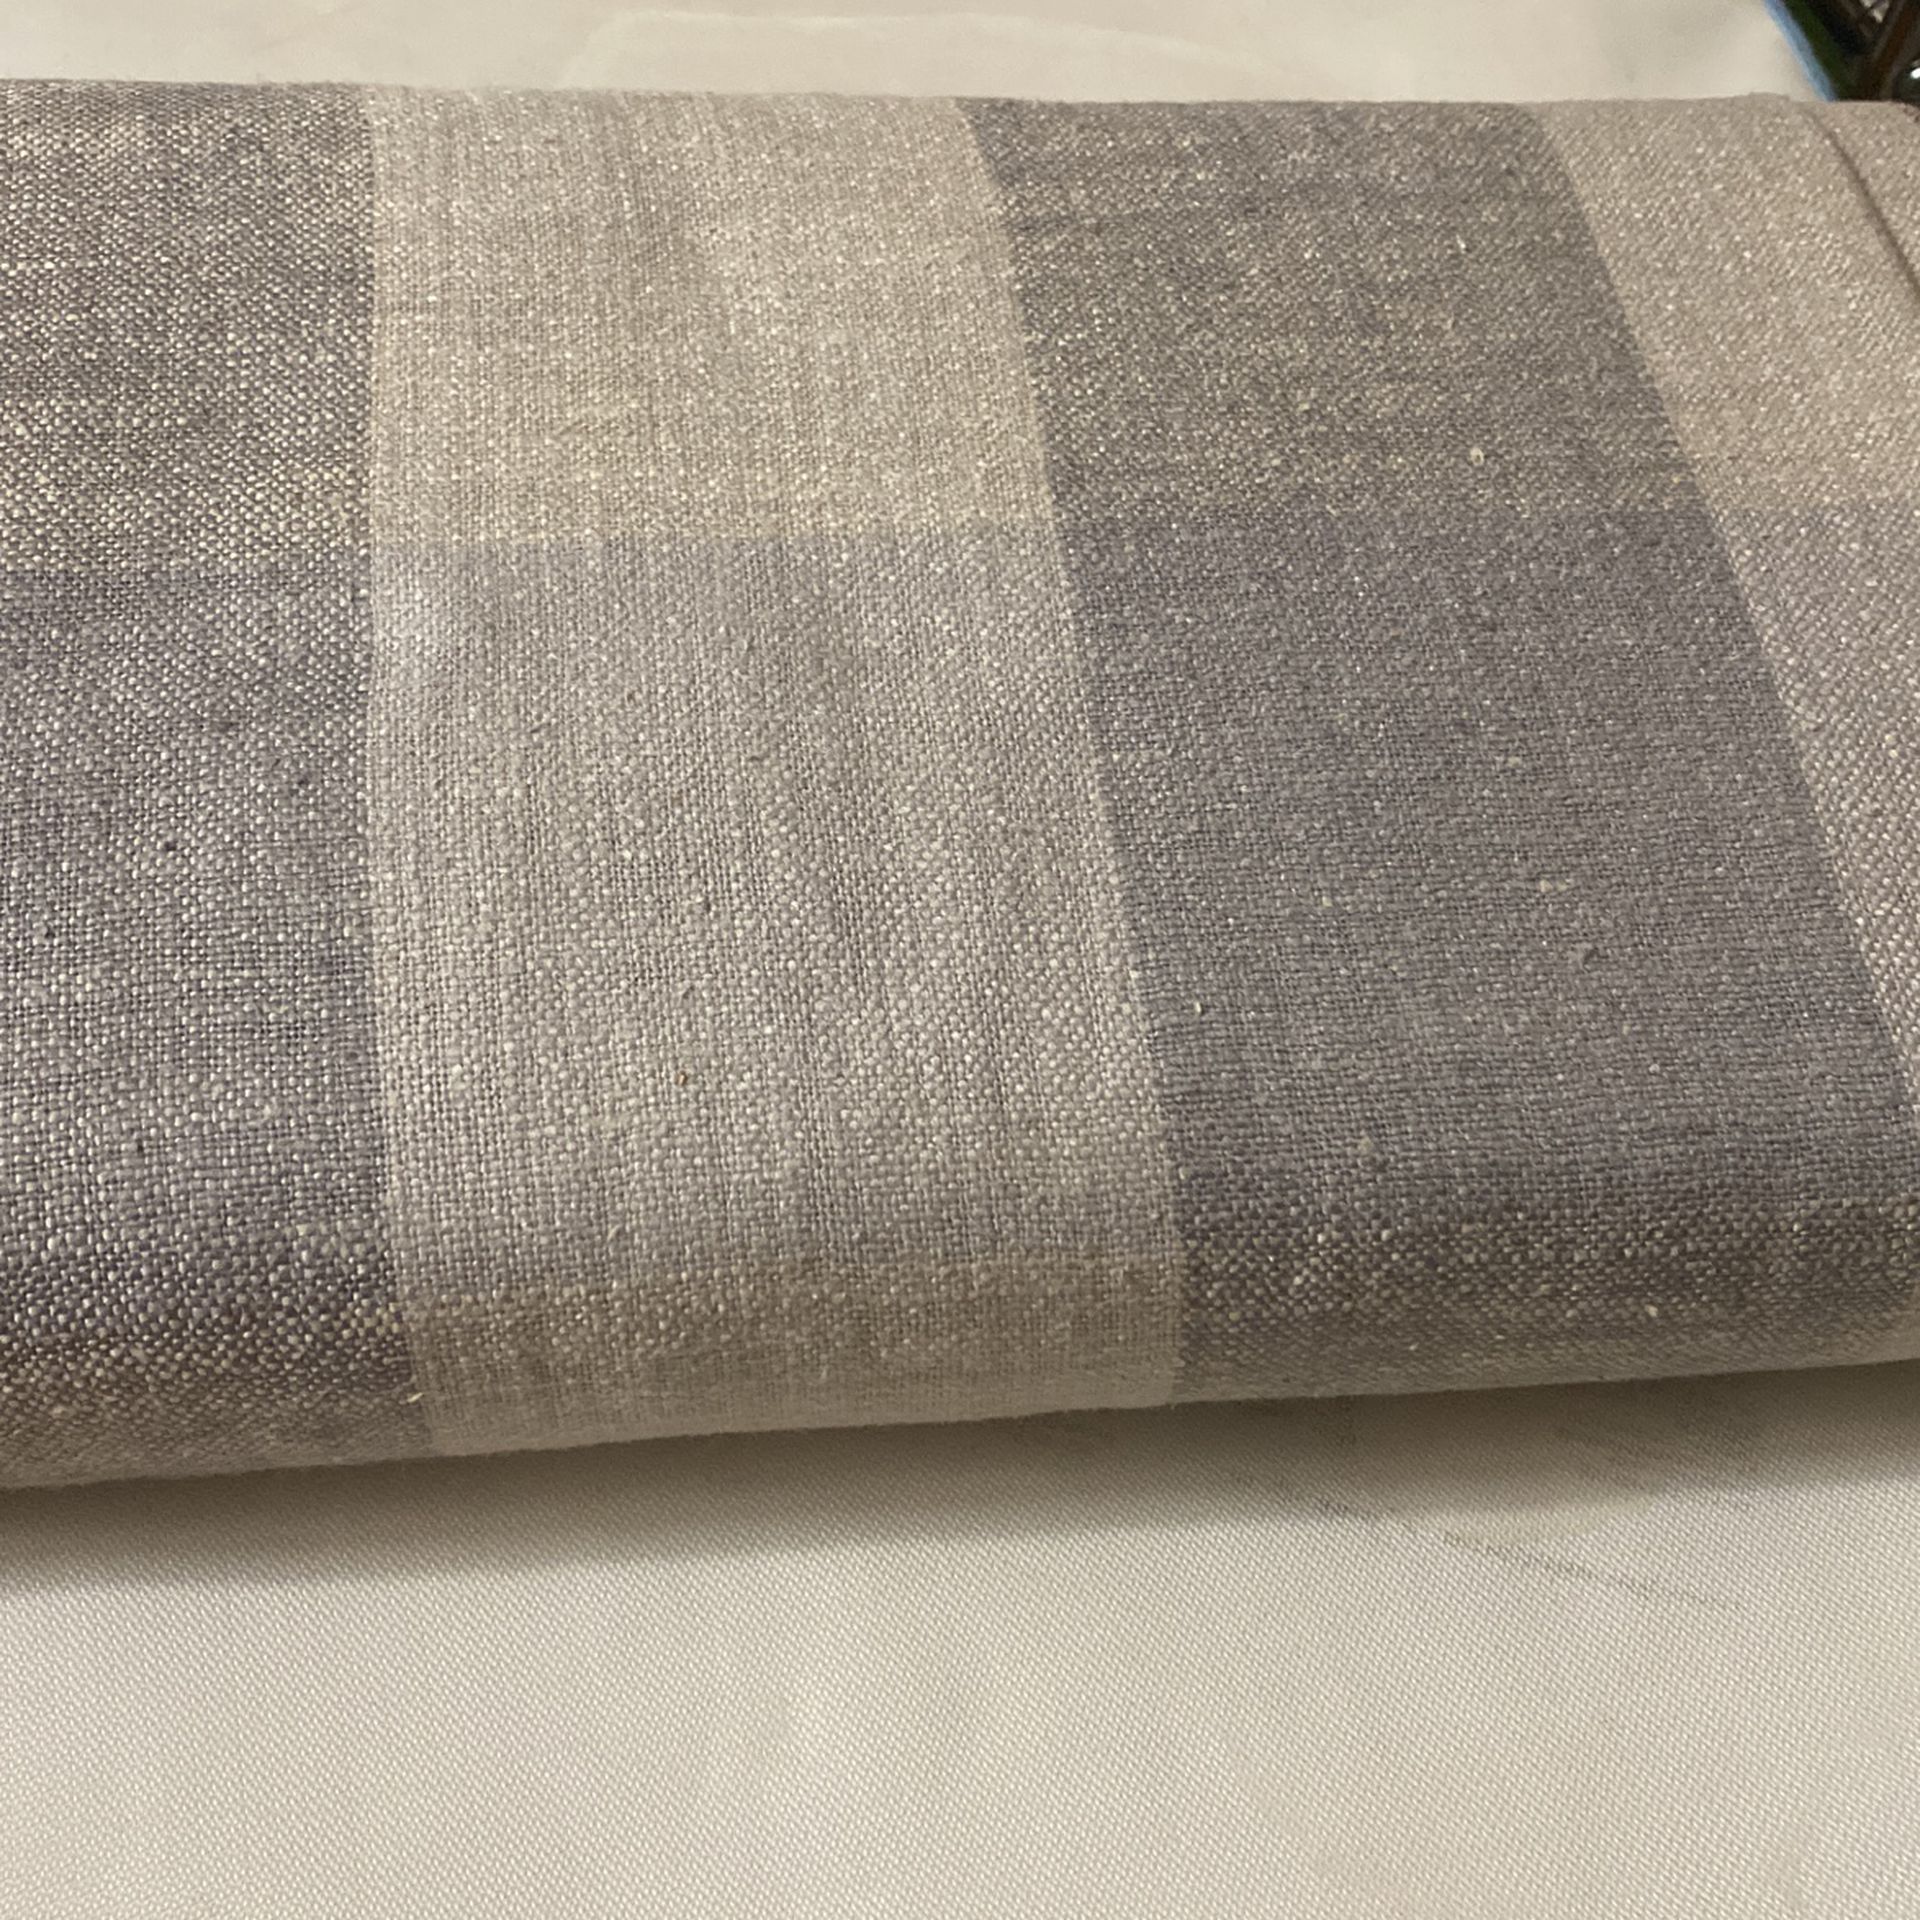 Three Shades Of gray linen 20.00 For The 4Yard Piece